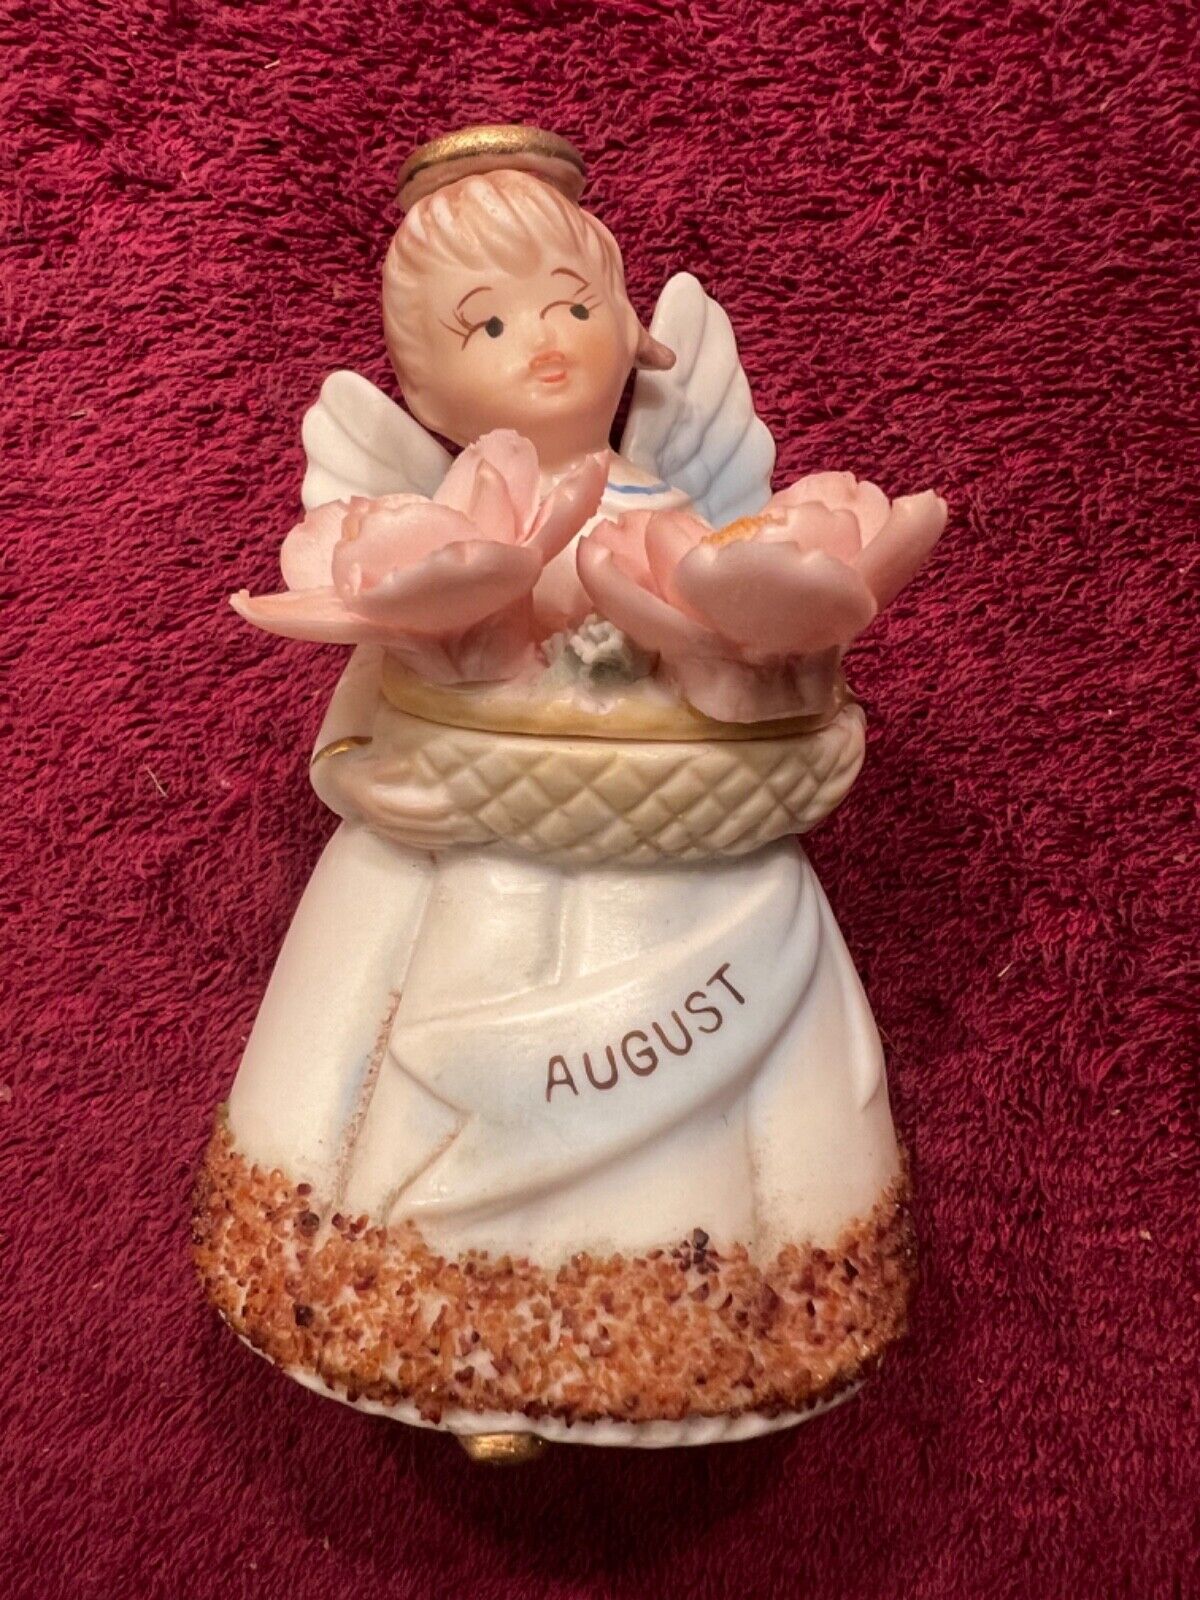 Vintage 1960’s Inarco JAPAN E-2600 August Porcelain Birthday Angel with label